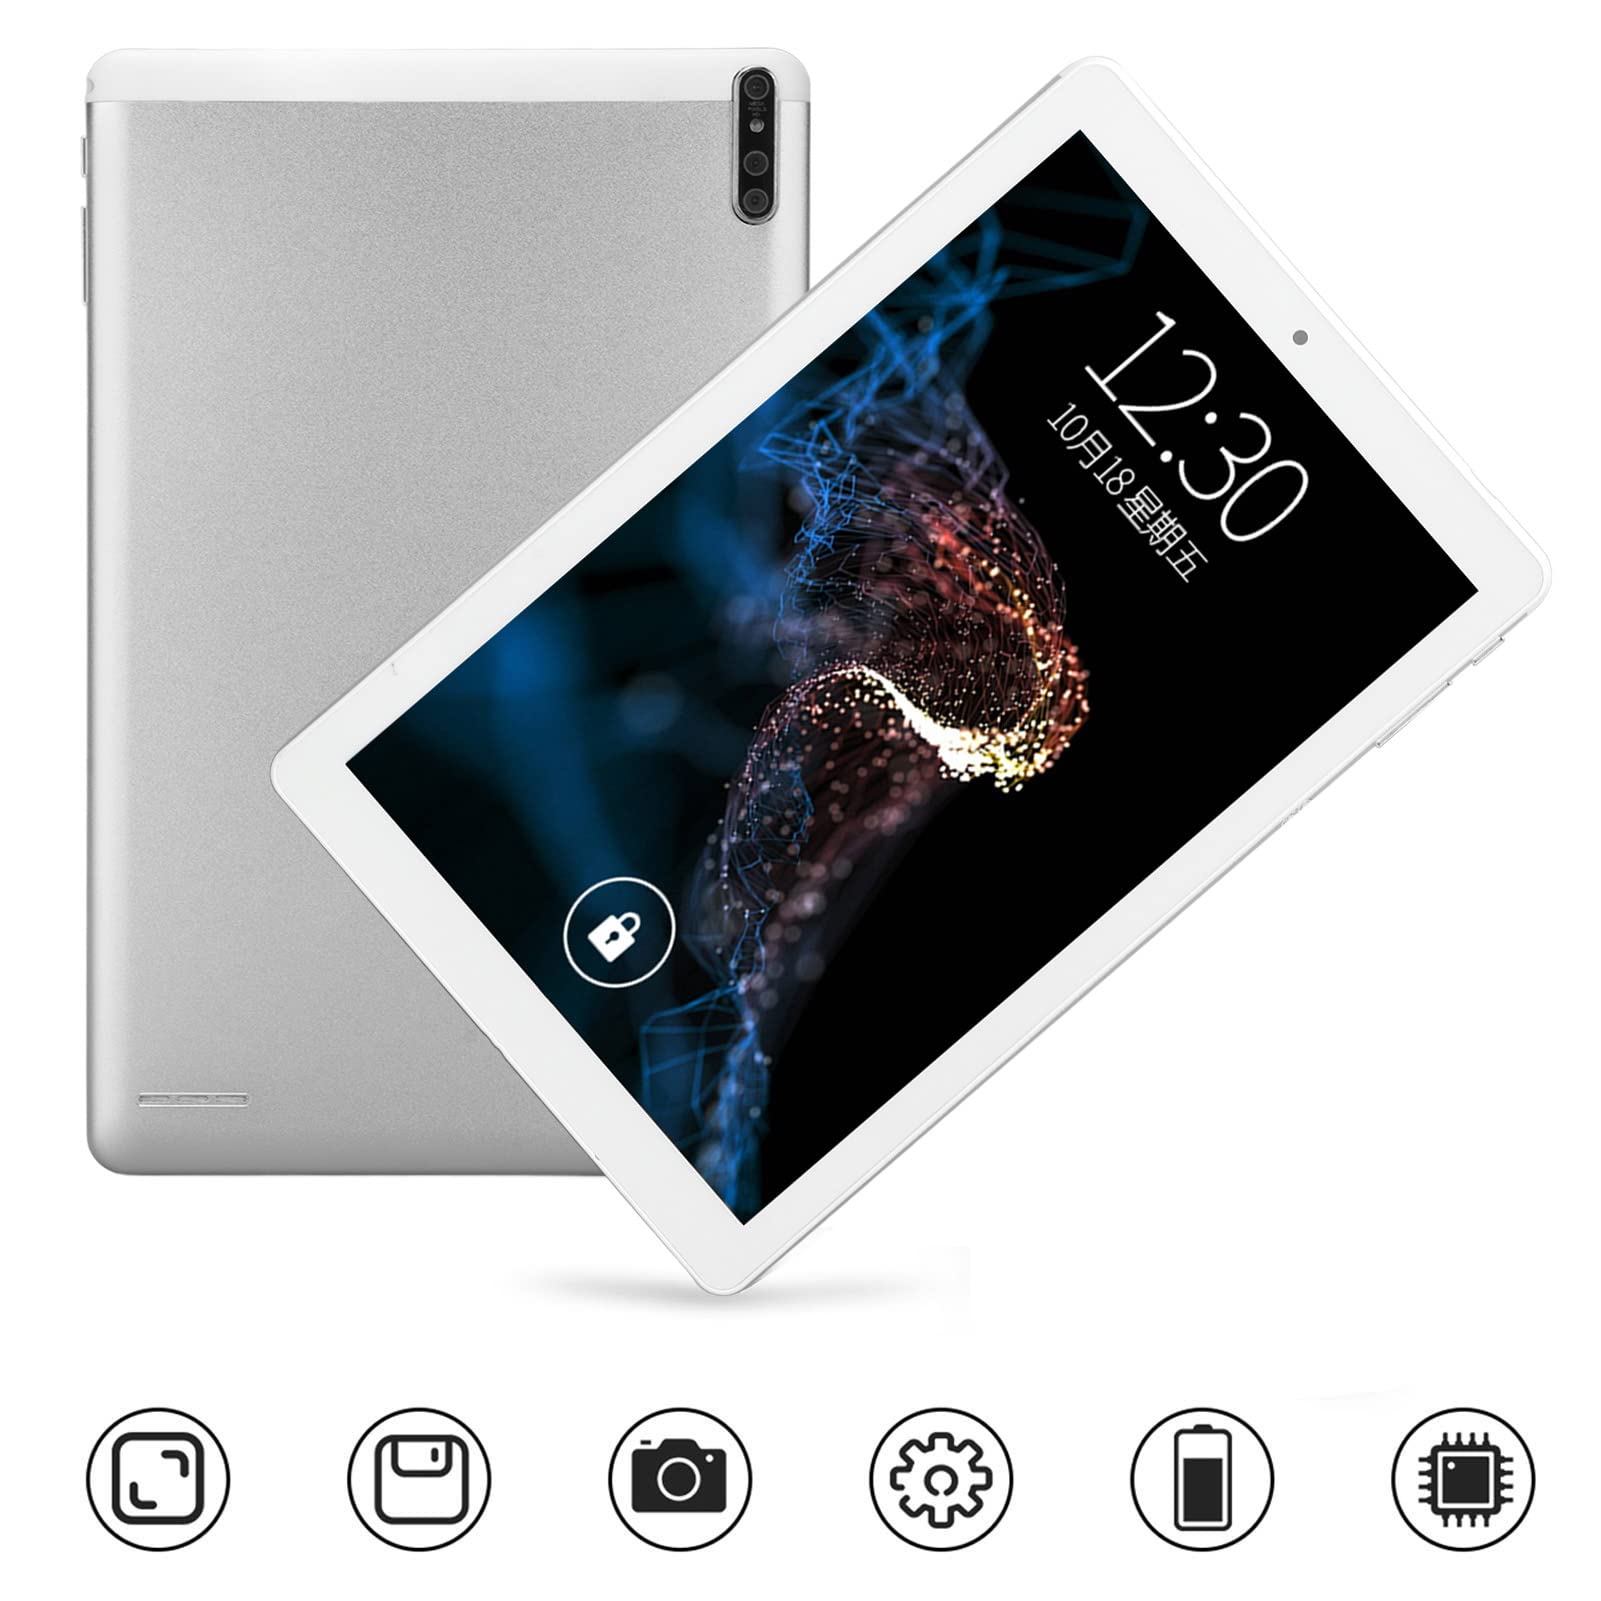 Octa Core 2.5Ghz CPU 128GB Tablet, 6GB RAM 10.1 Inch 1960x1080 IPS HD Tablet, Front 5MP Rear 13MP Camera, Android 11, 8800mAh Long Standby, Dual Speaker, 5G WiFi Tablet(us)